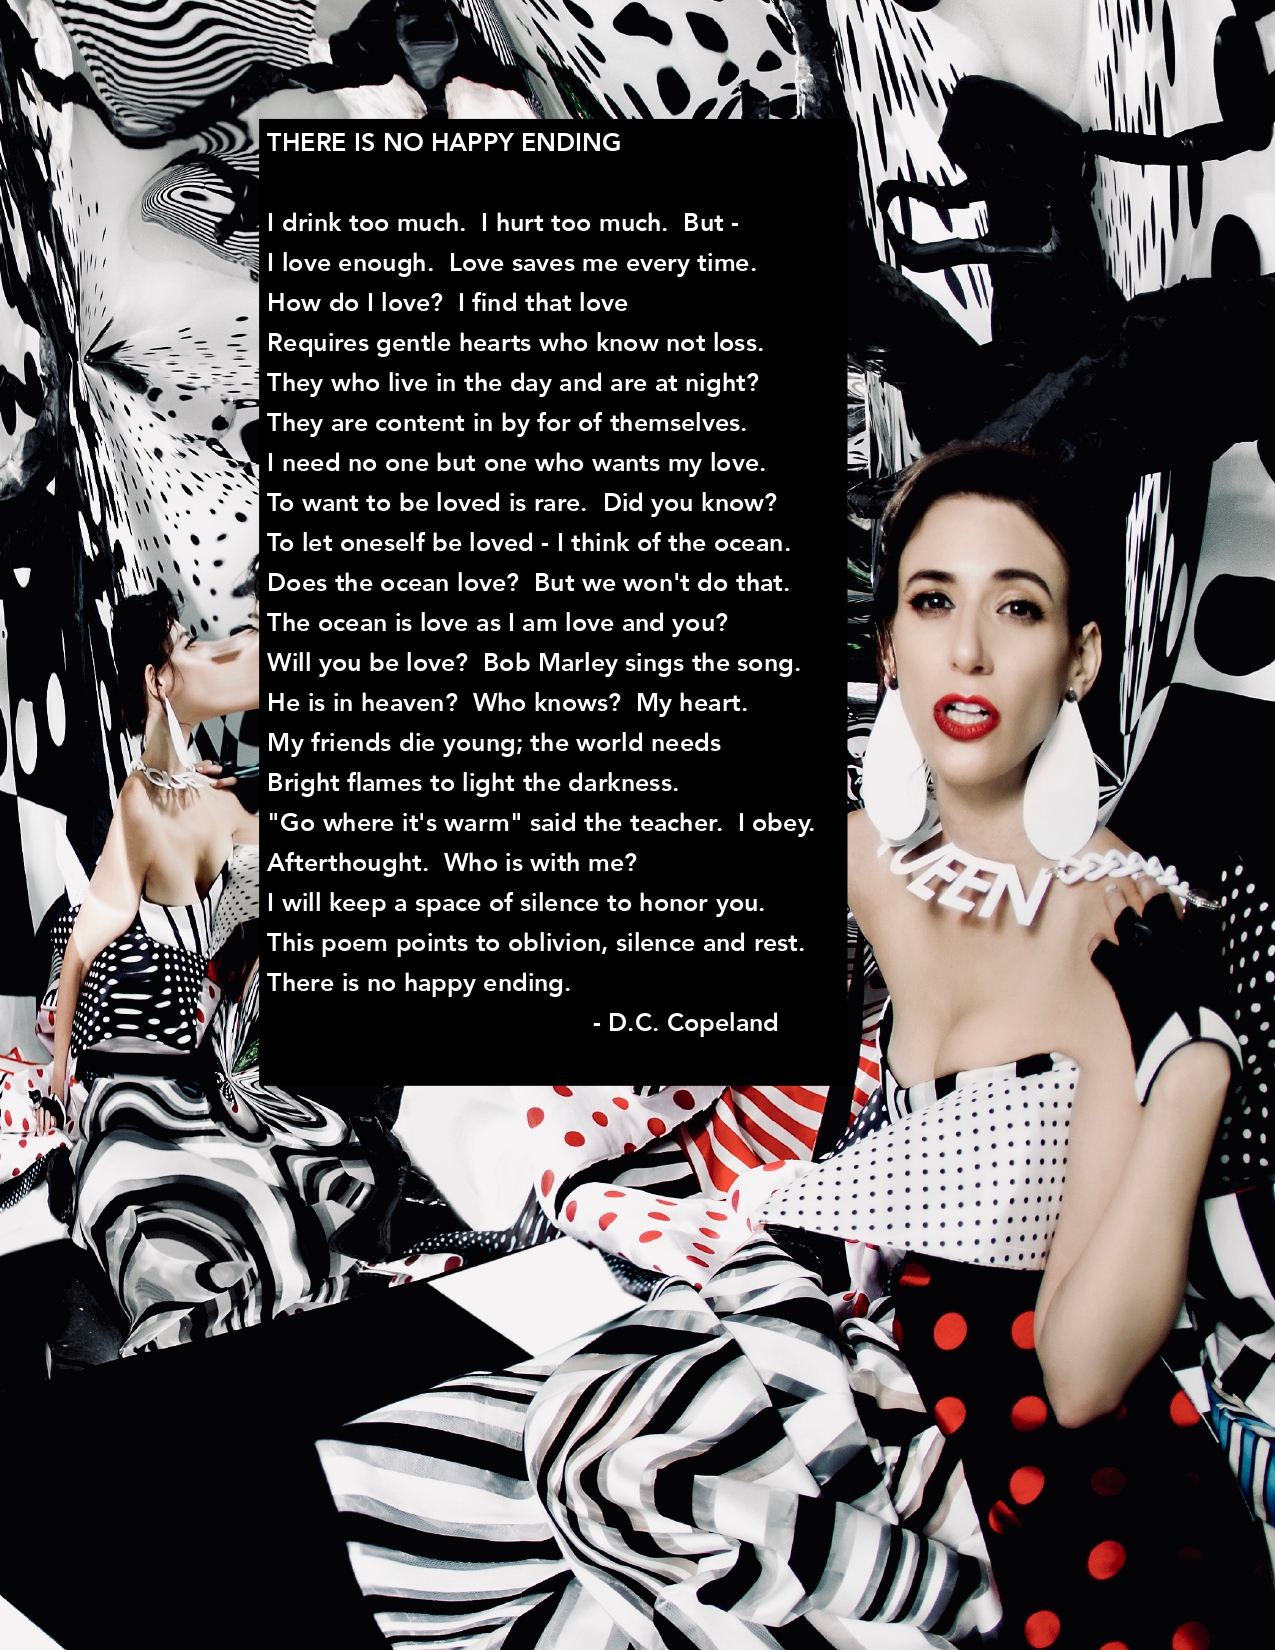 A poem is written in white text on top of a black square that is centered over a photo of a white woman in a many-layered dress with white, black, and red patterns. The images in the photo are mirrored and liquified. Click the image to access a PDF with readable text.